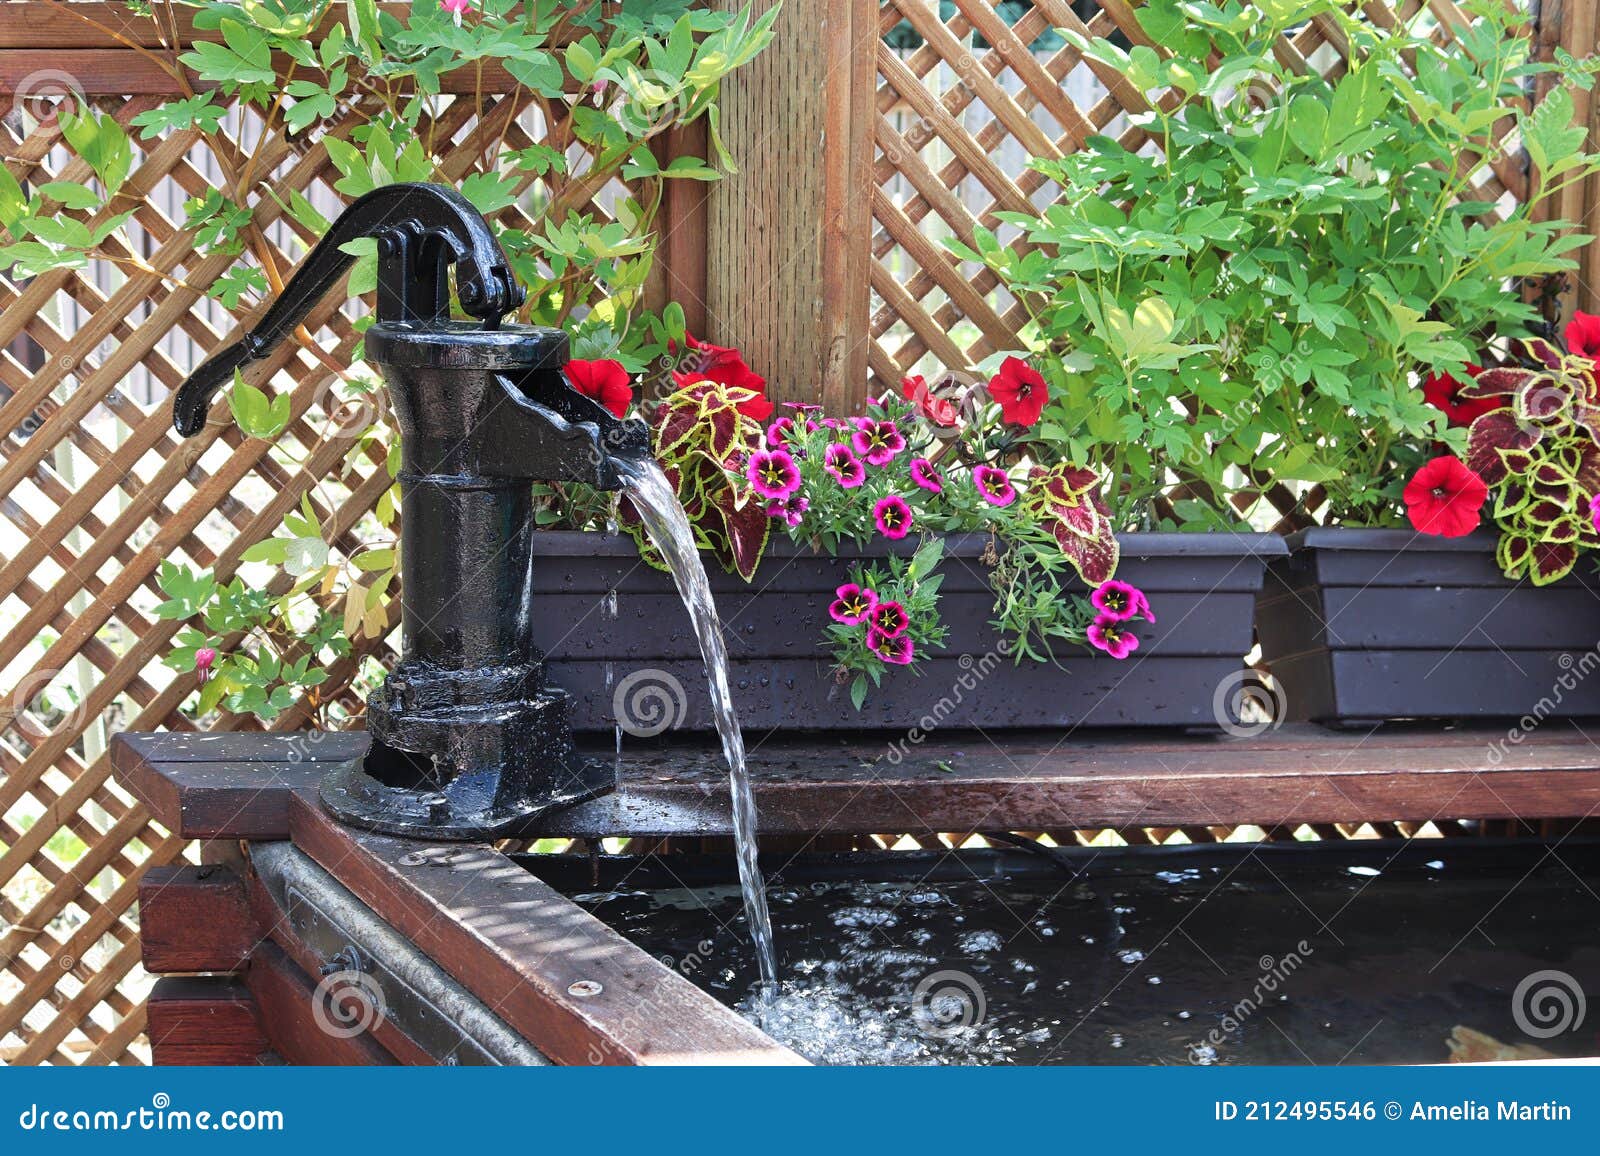 a water fountain infront of a lattice with annuals